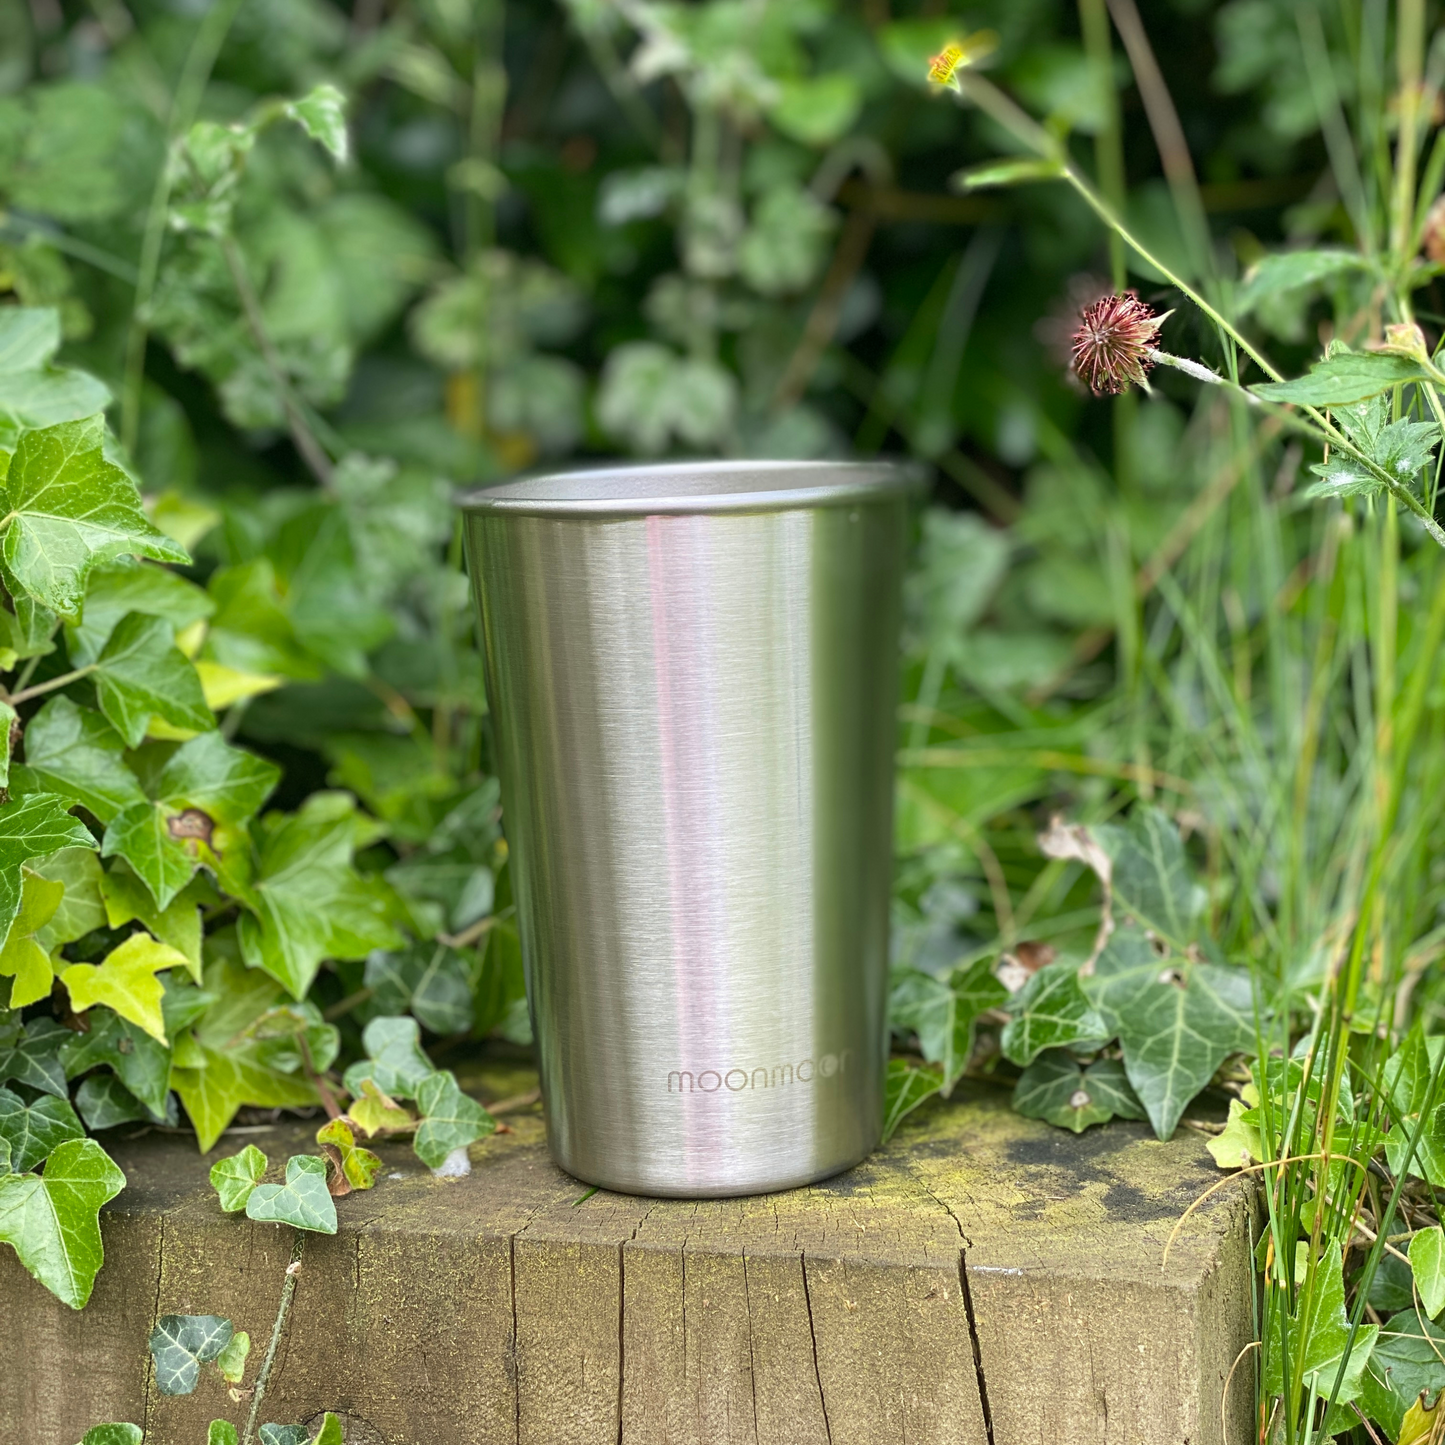 premium stainless steel cups uk best travel tumbler camping dinner set festival cup low waste stainless steel cups for sale stainless steel cups for kids stainless steel cups wholesale stainless steel cups near me stainless steel cups supplier UK